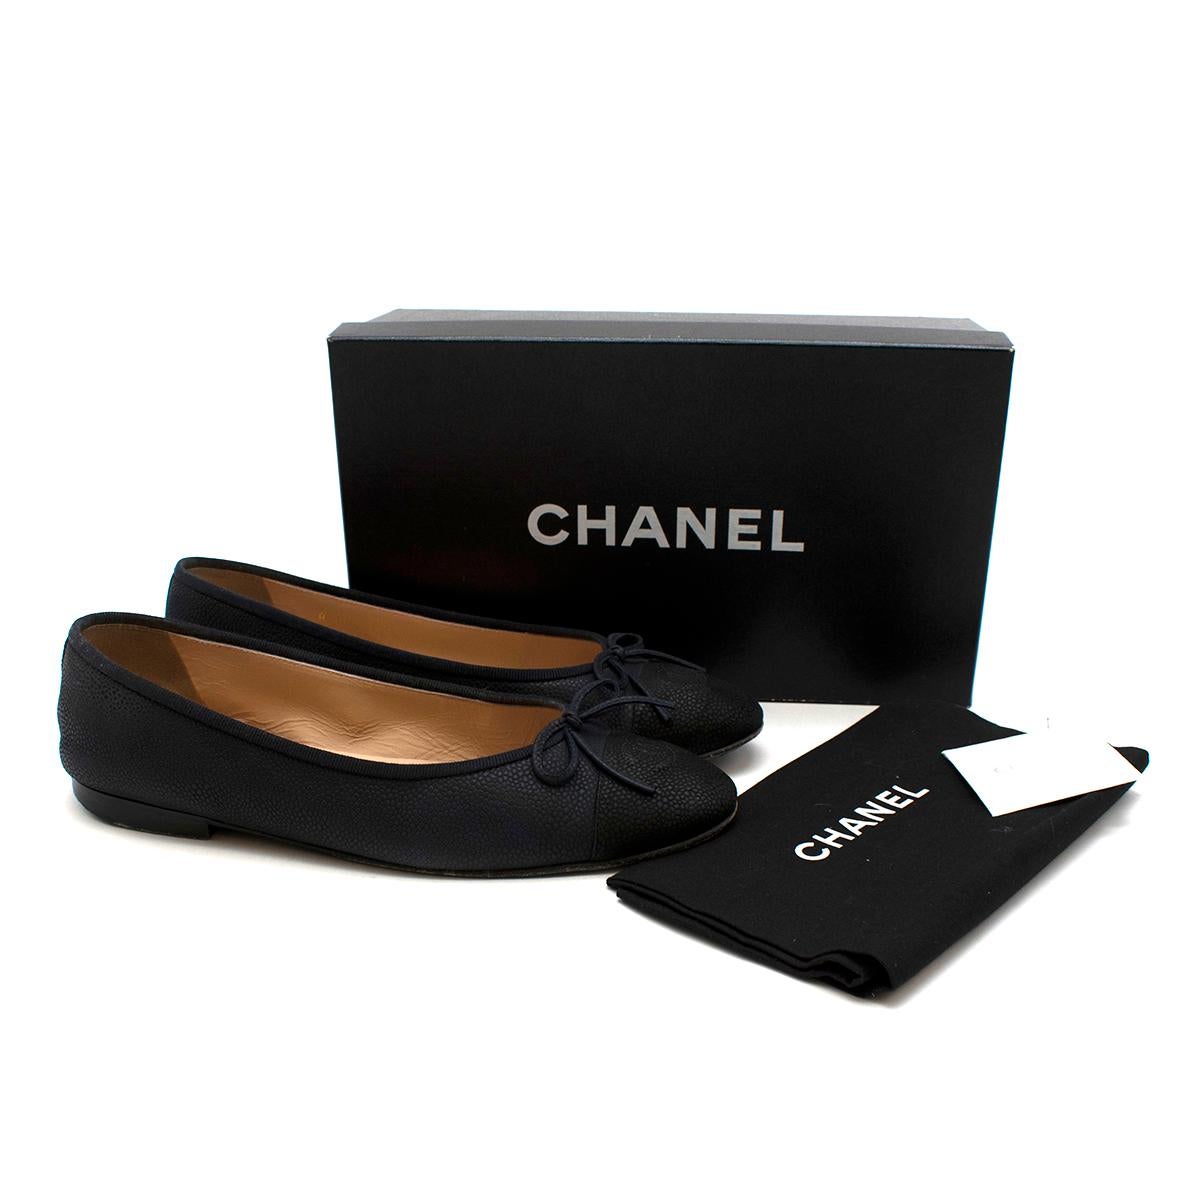 Chanel Black Caviar Leather Ballerina Flats 

- Made of textured caviar leather 
- Neutral blue and black hues 
- Classic style 
- Legendary CC logo details to the toes 
- Original box and dust bag 
- Bow detail to the heels 
- Elegant comfortable